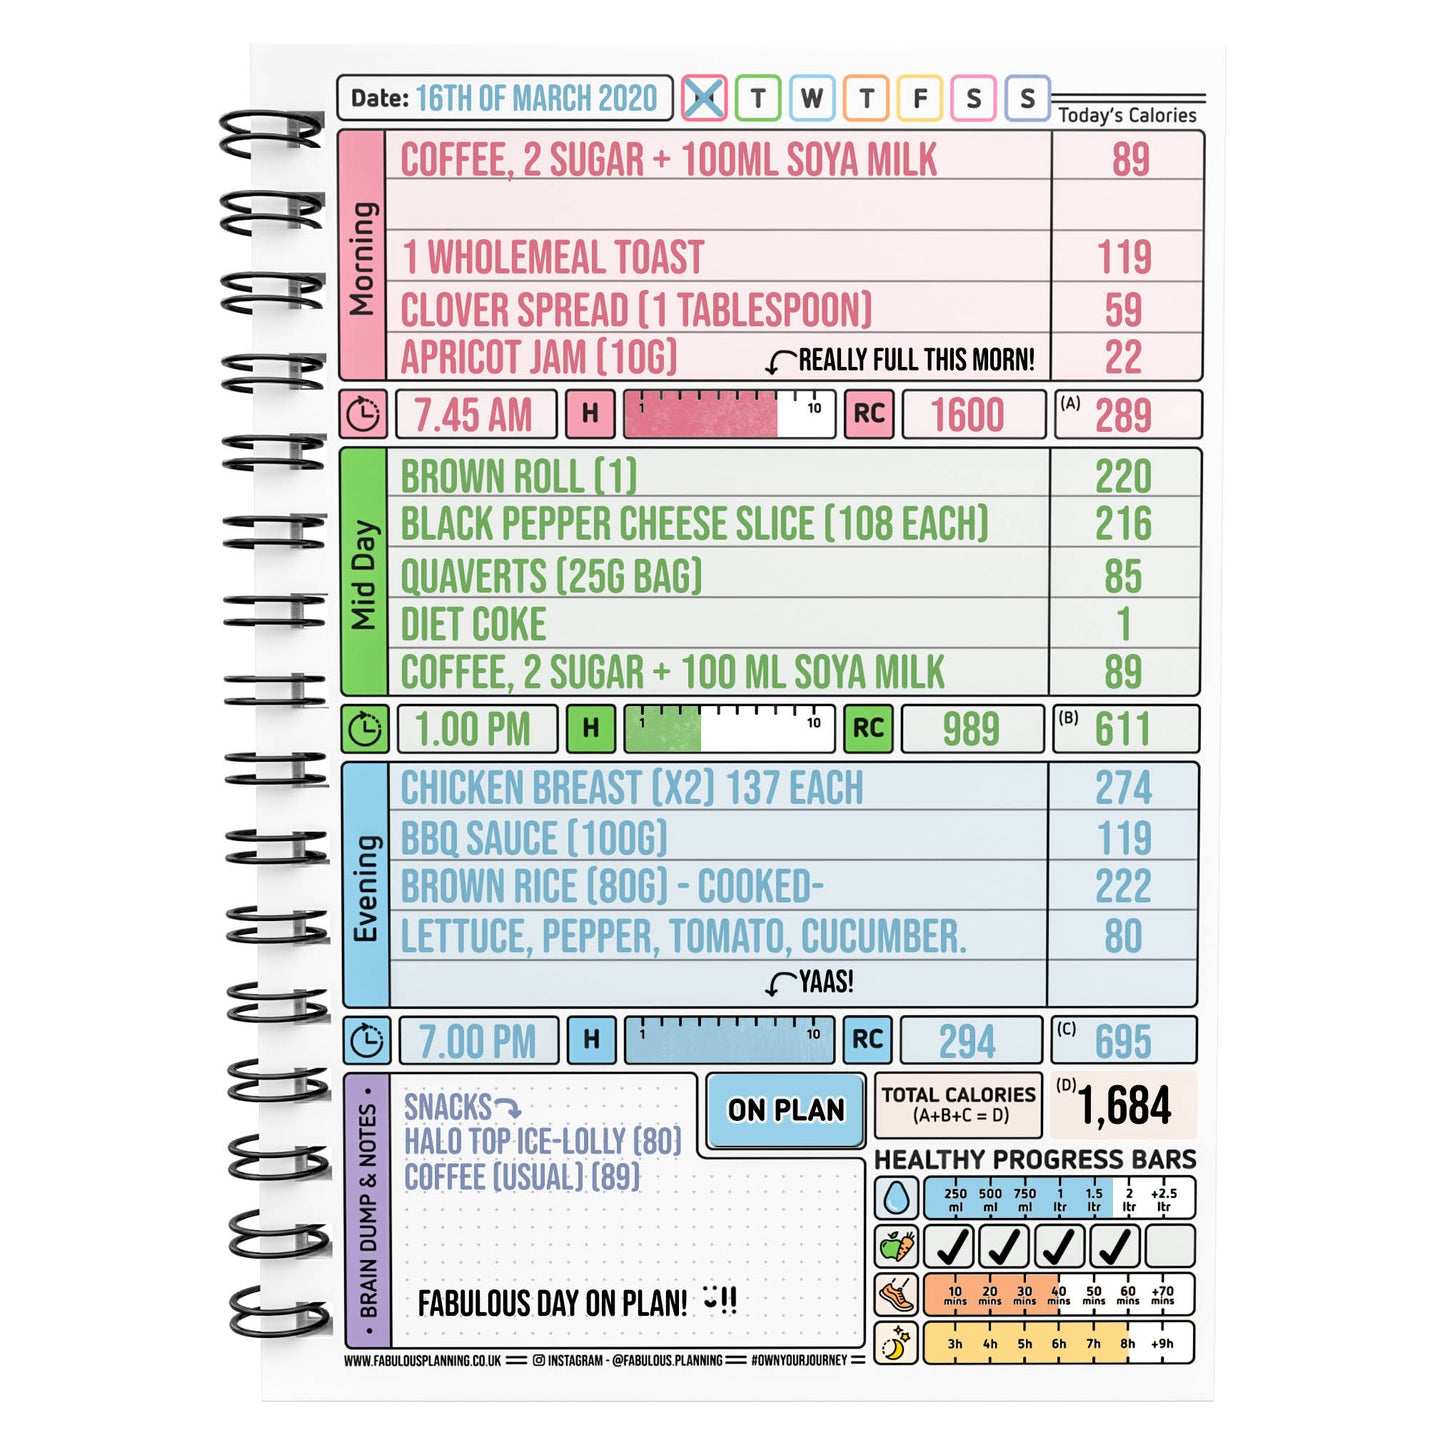 Food Diary - C46 - Calorie Counting